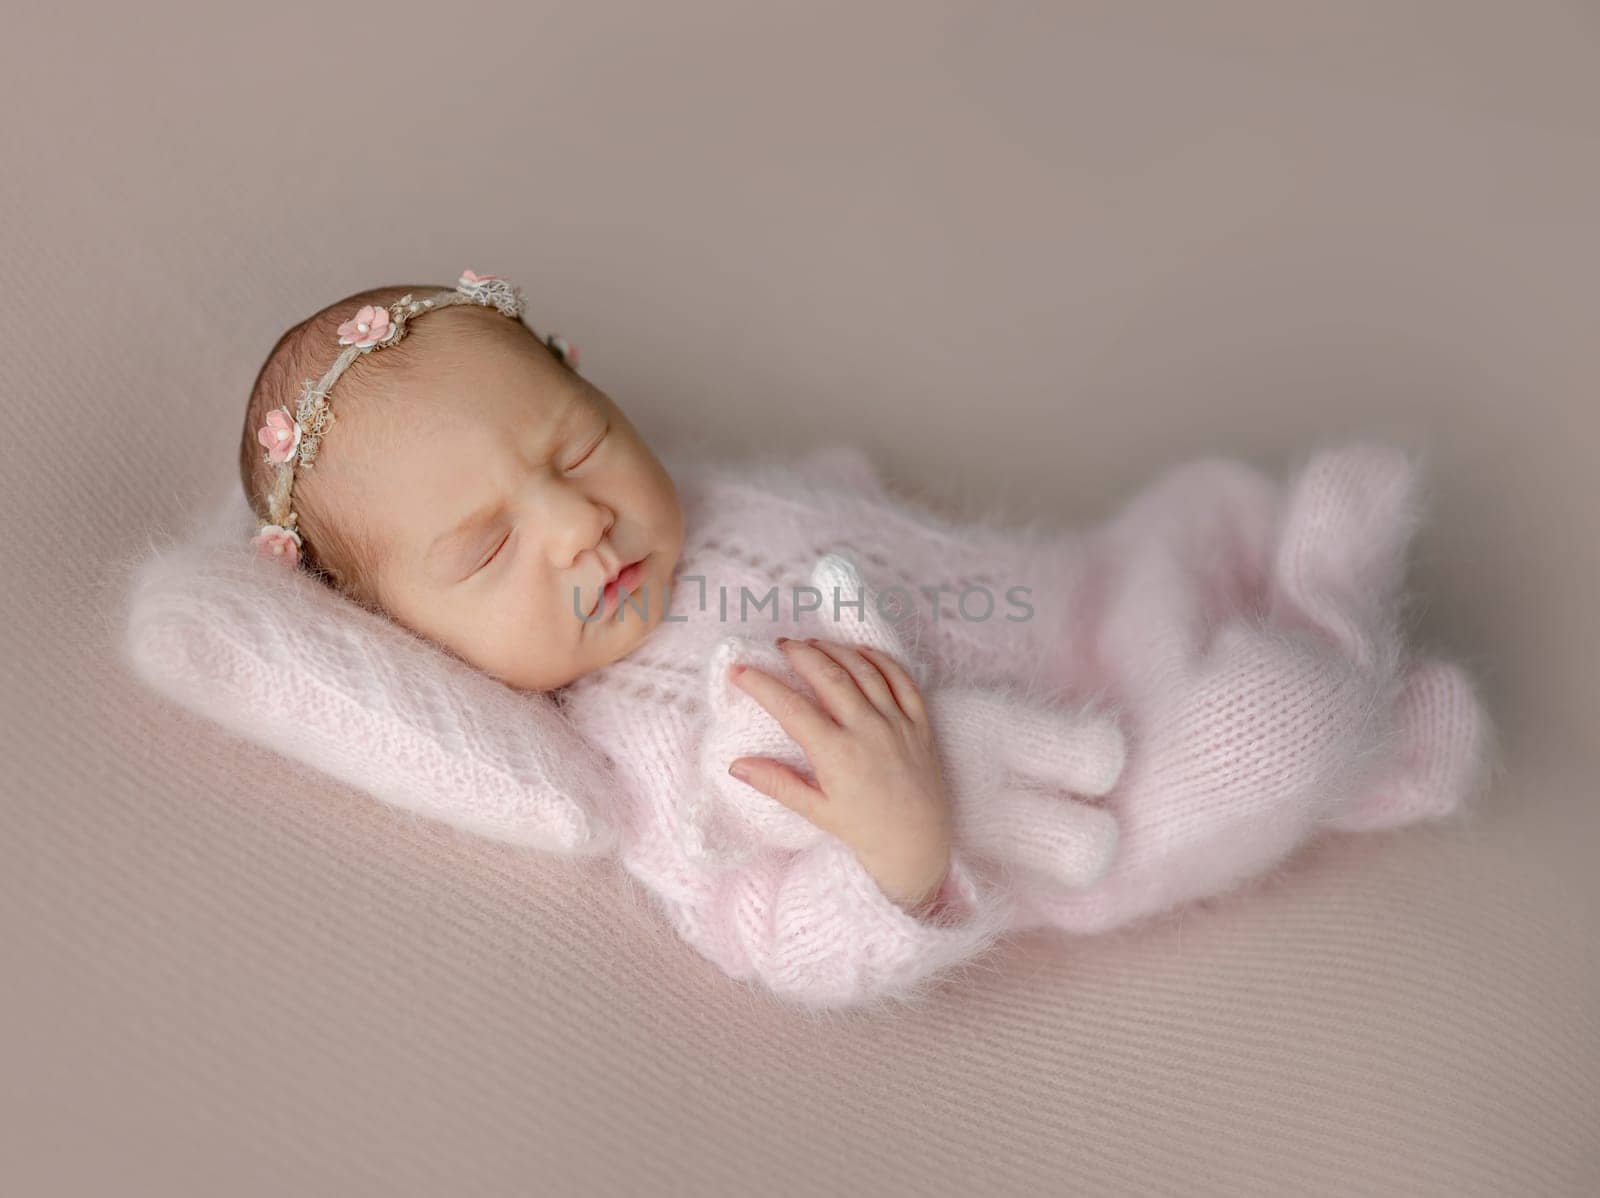 Newborn Girl In Pink Outfit Sleeps With Toy Cat by tan4ikk1